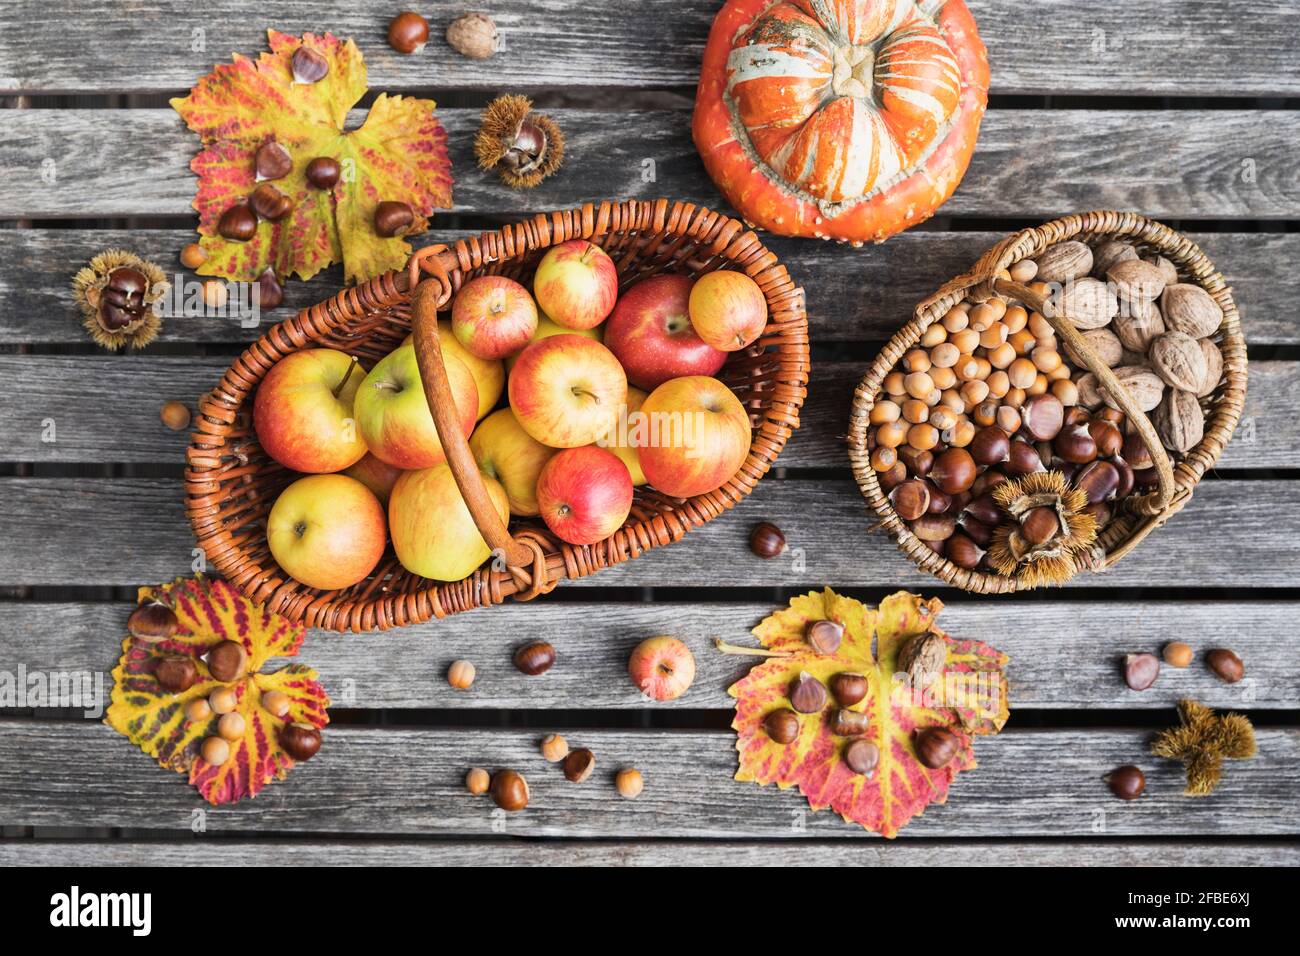 Autumn harvest on garden table: apples, nuts and chestnuts in baskets and edible pumpkin Stock Photo